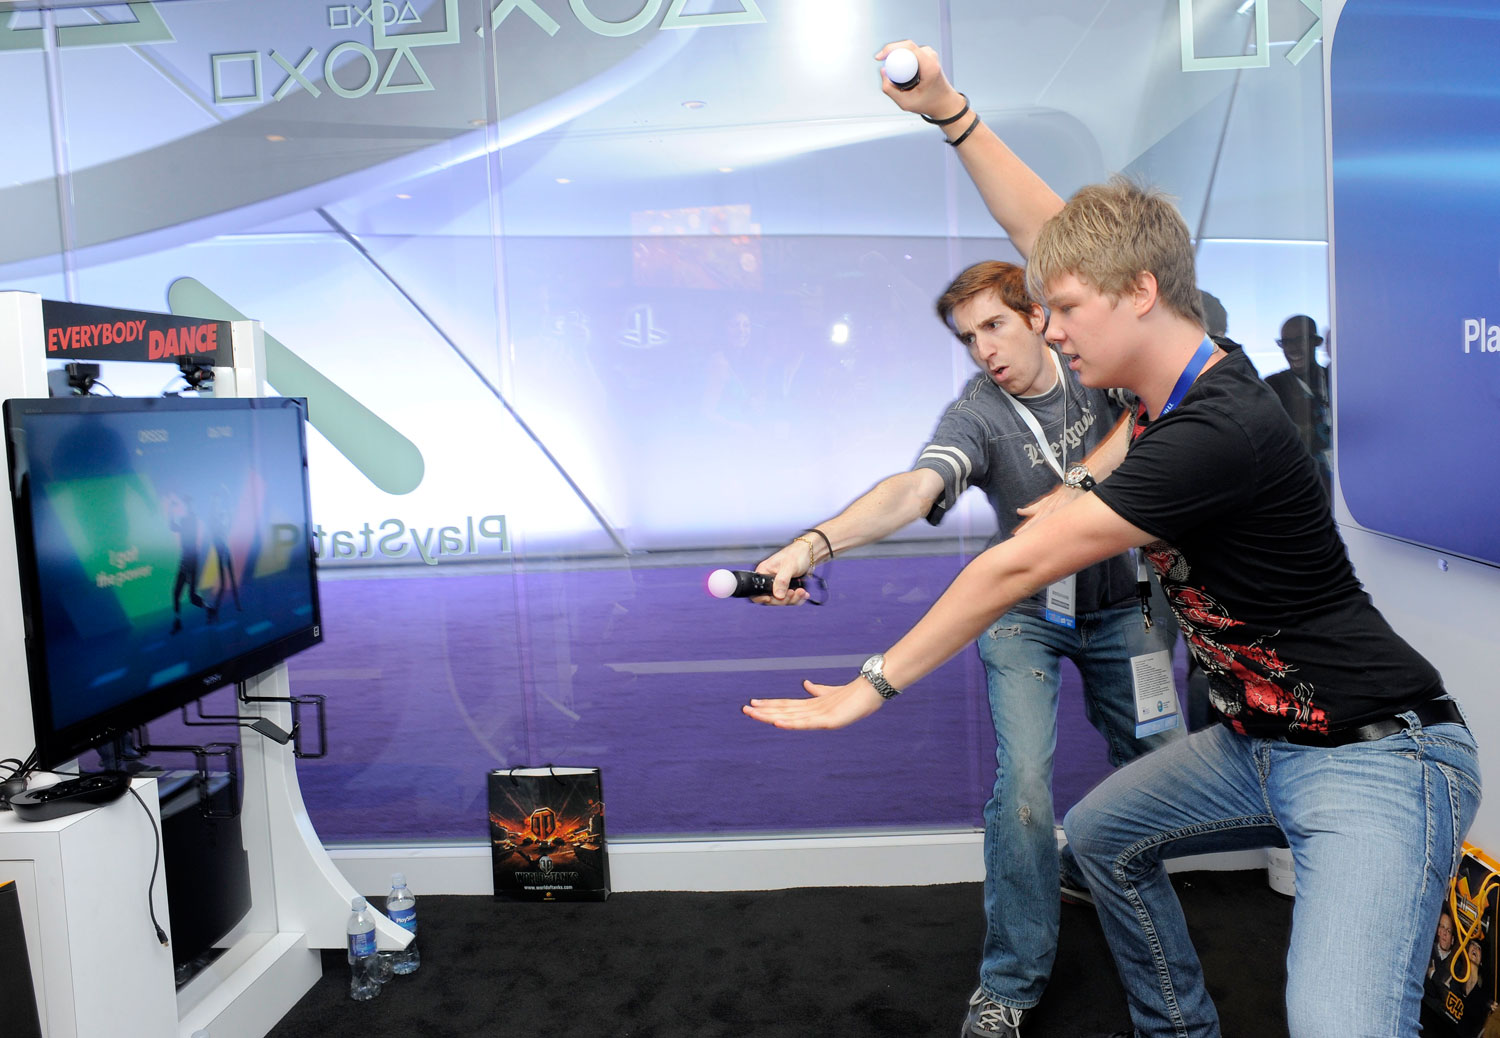 Gamers play with the Playstation Move at the Electronic Entertainment Expo (E3), in Los Angeles on June 9, 2011.